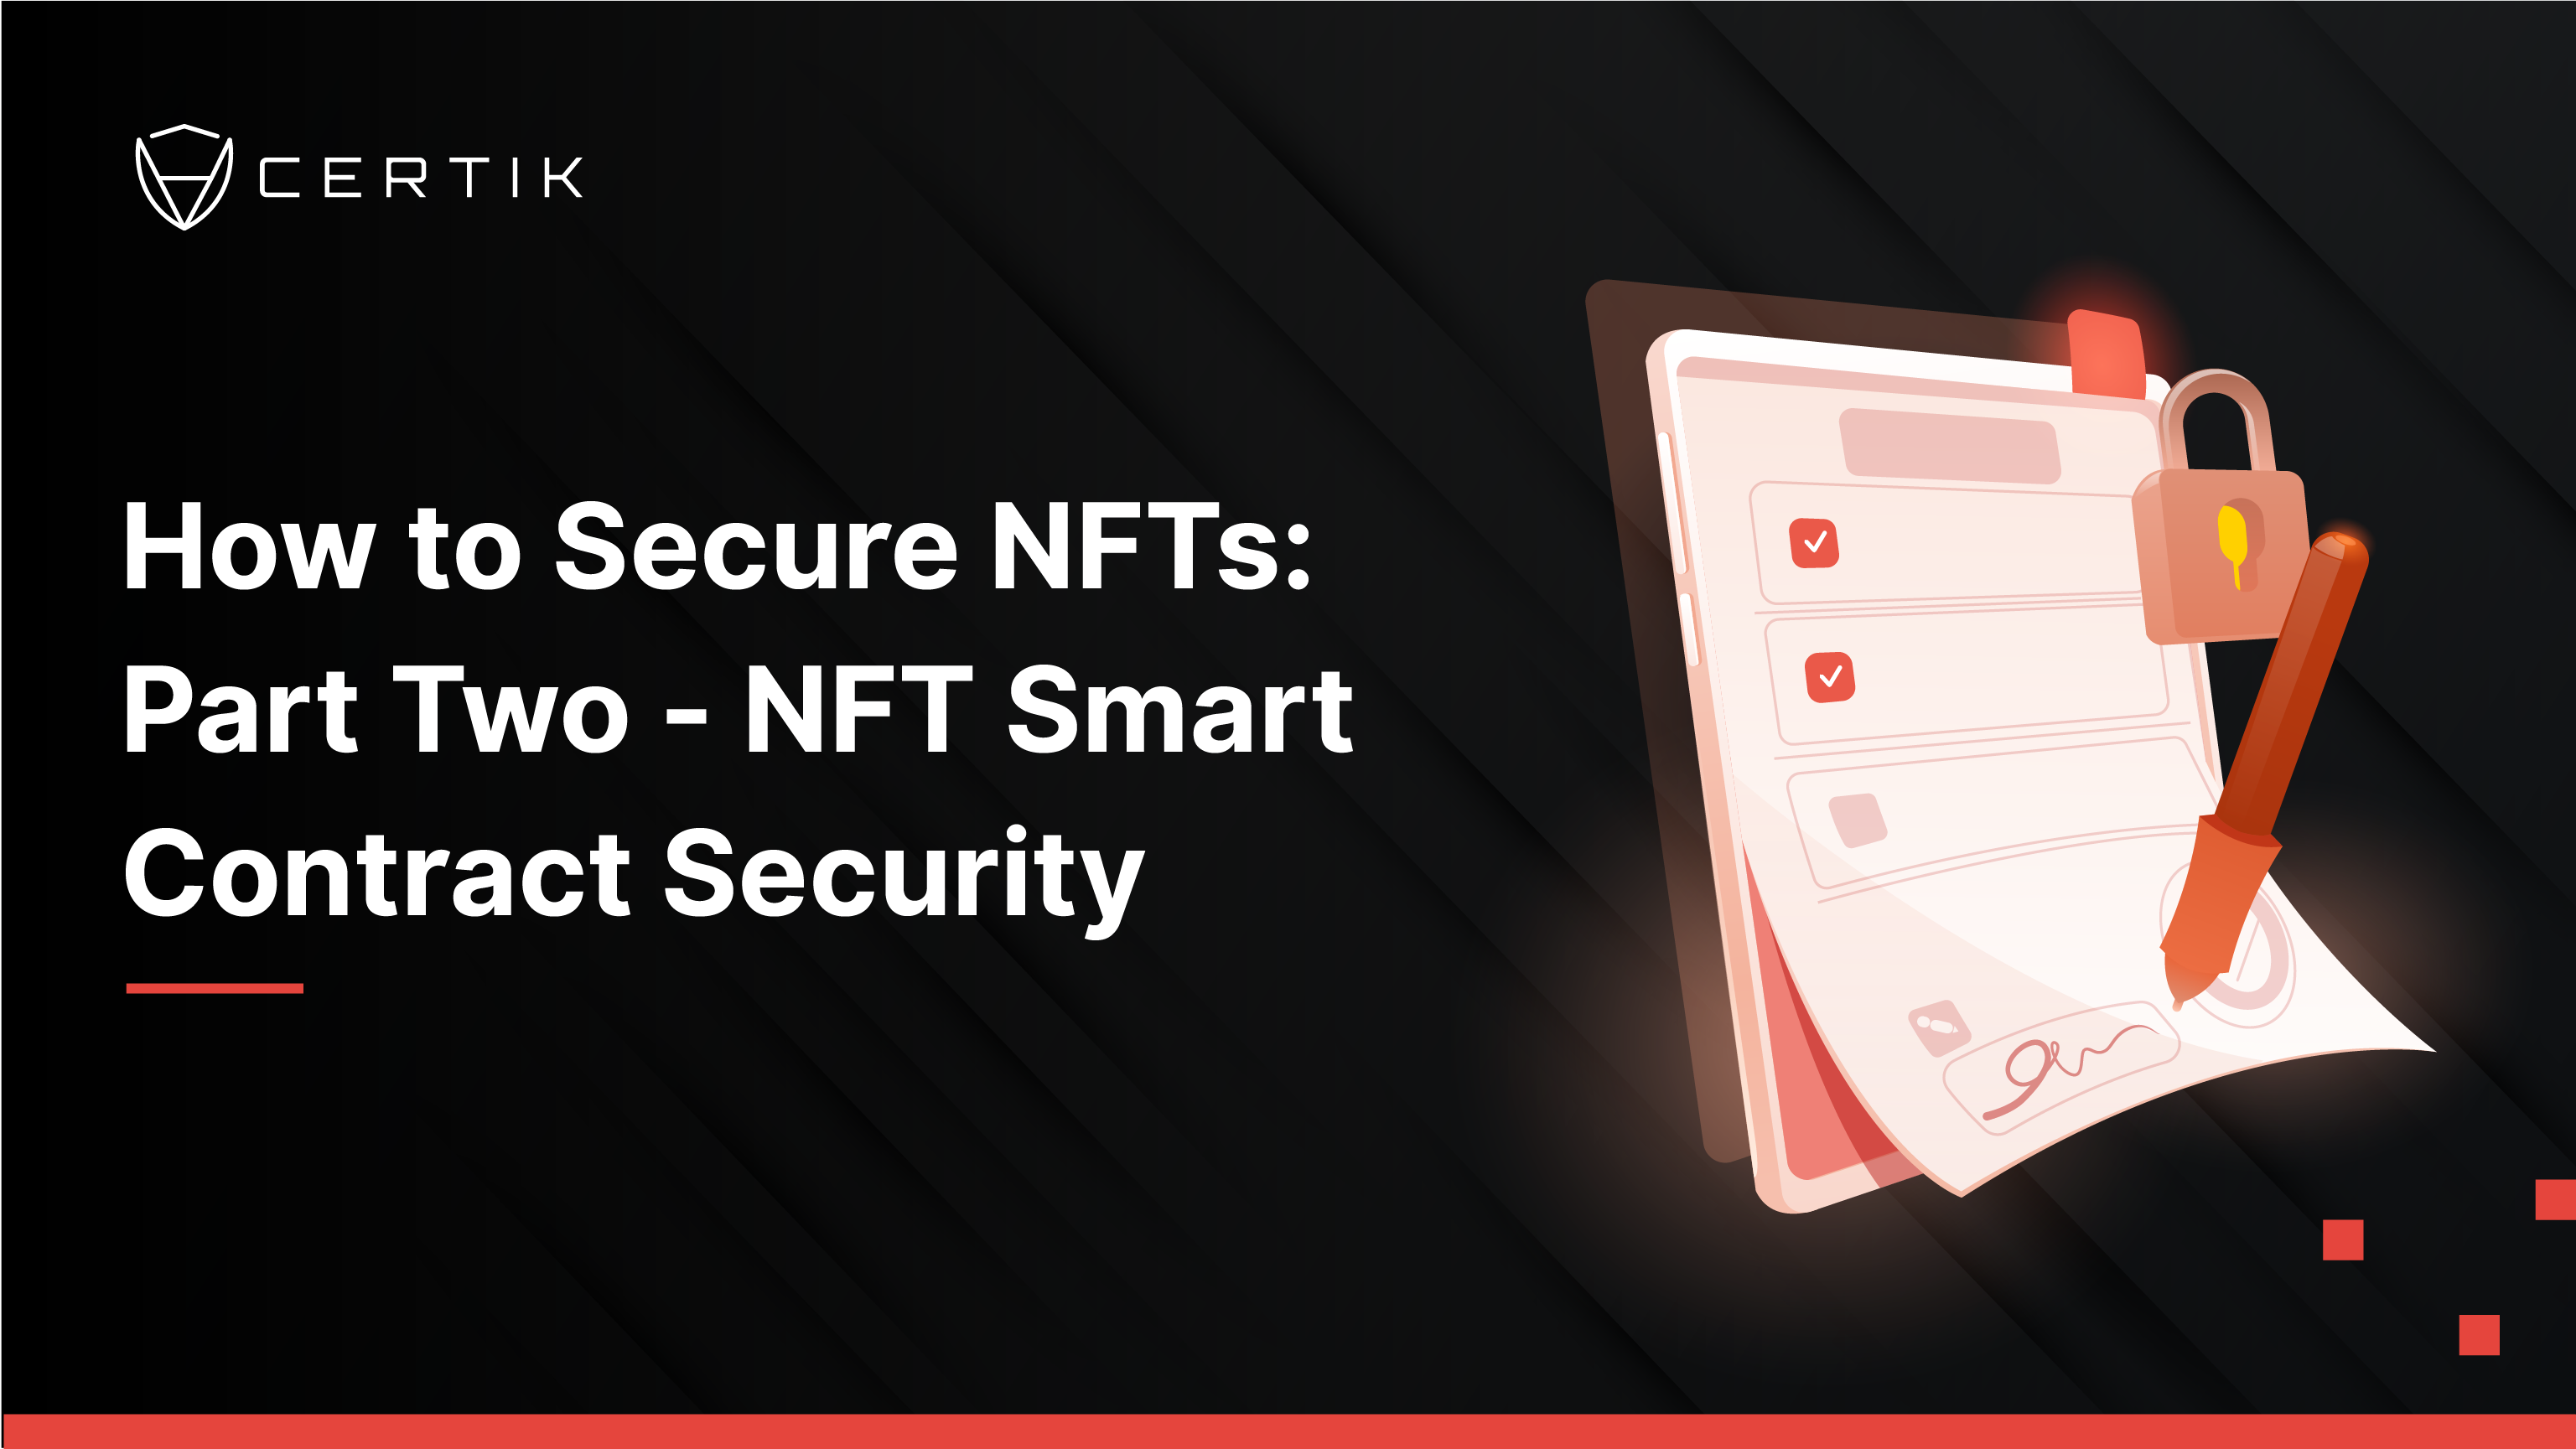 How to Secure NFTs: Part Two - NFT Smart Contract Security